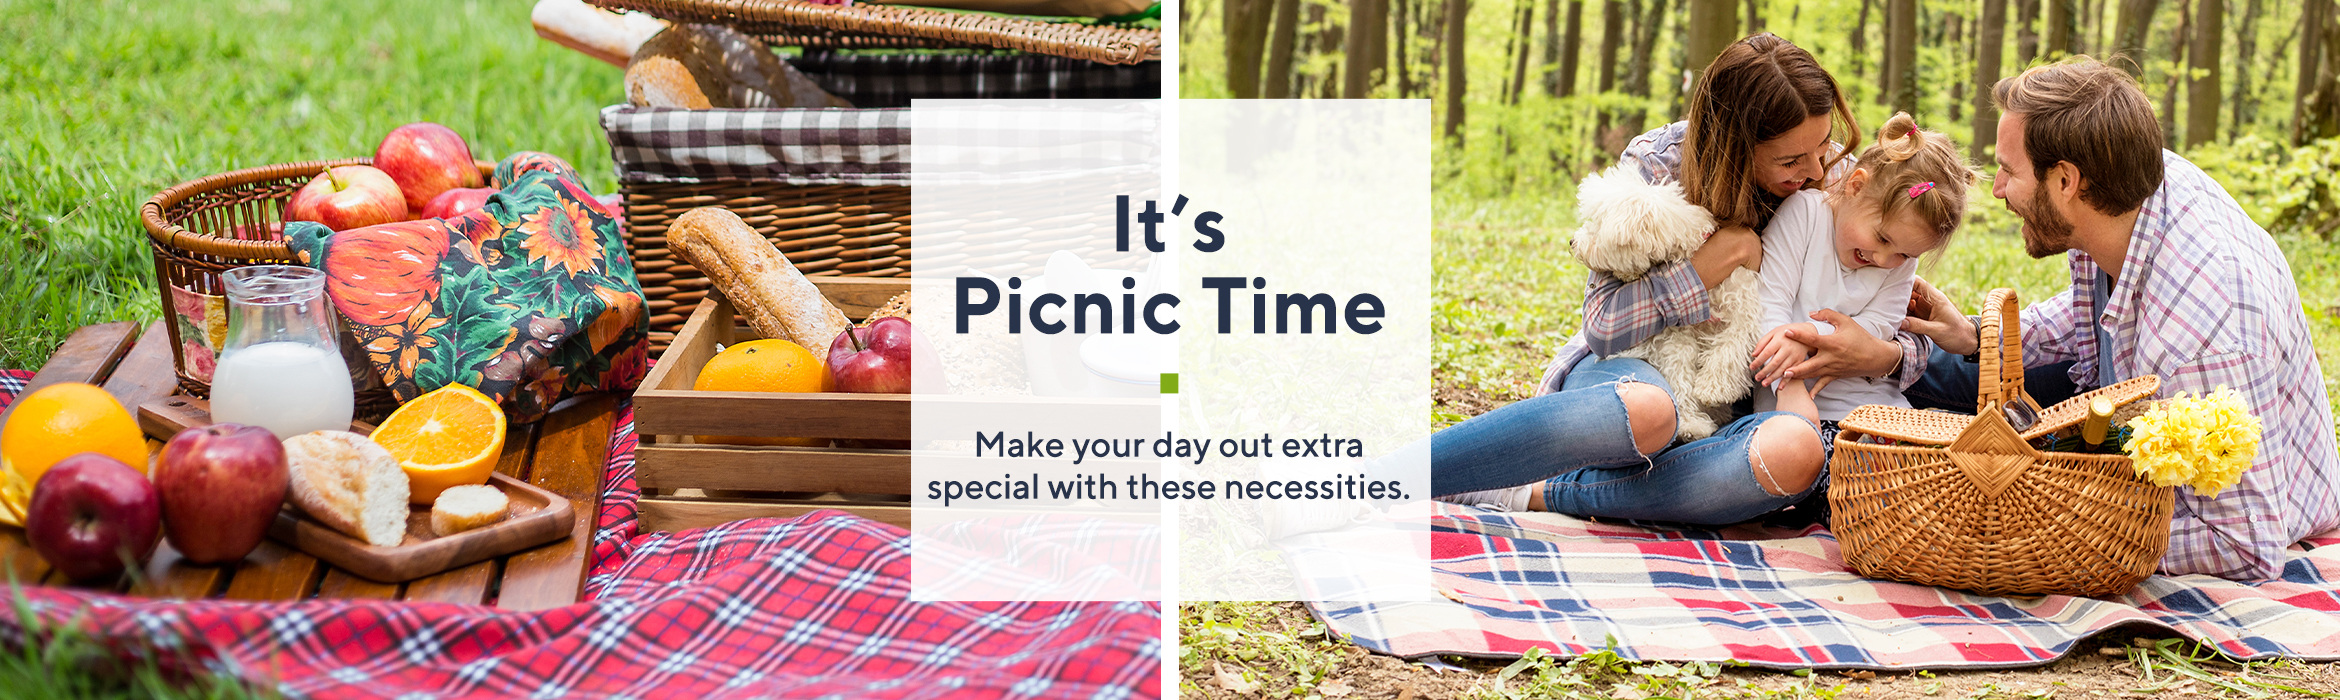 It's Picnic Time  Make your day out extra special with these necessities 